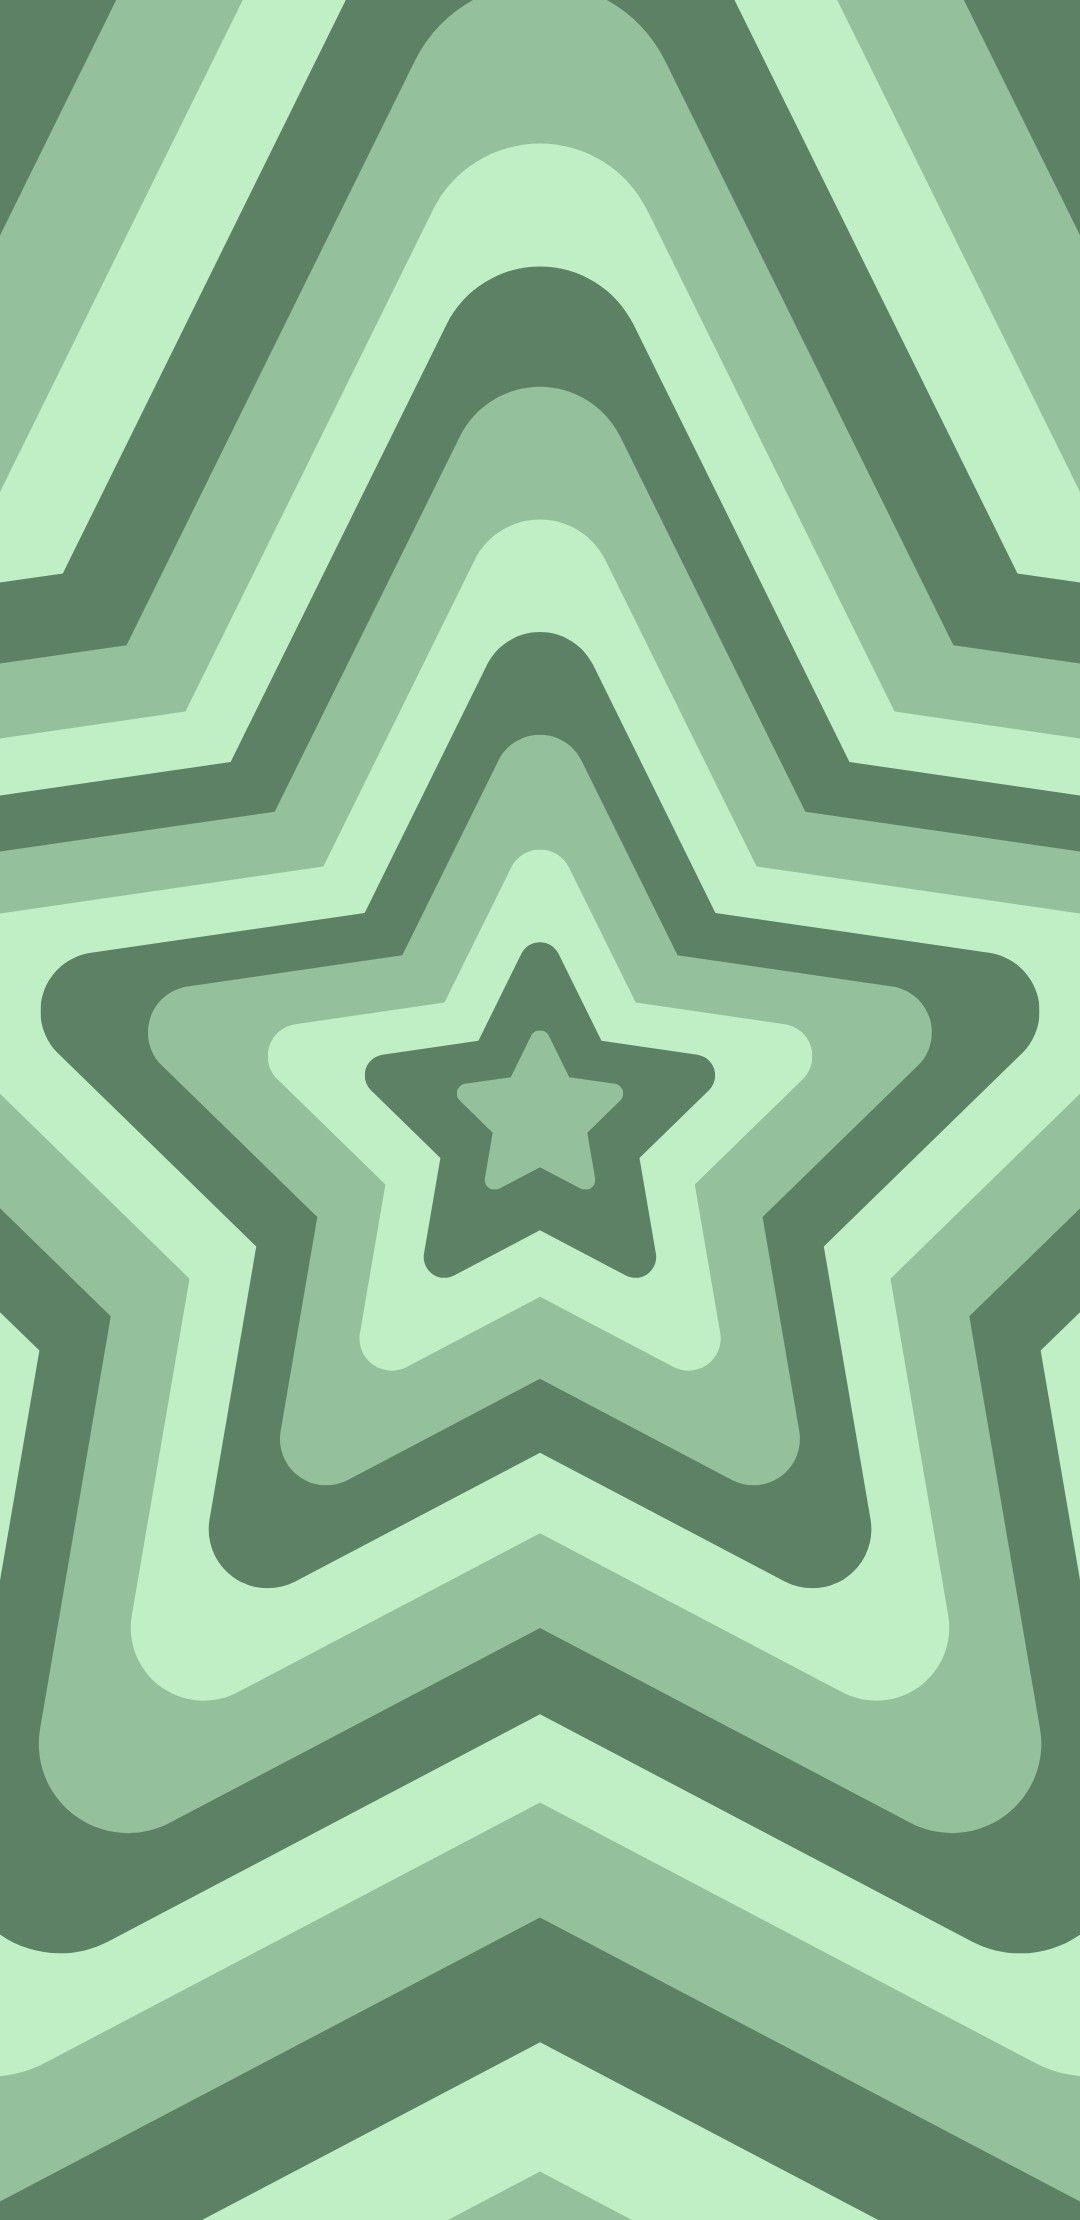 Green aesthetic wallpaper layered star indie y2k. Wallpaper layers, Iconic wallpaper, Abstract wallpaper design